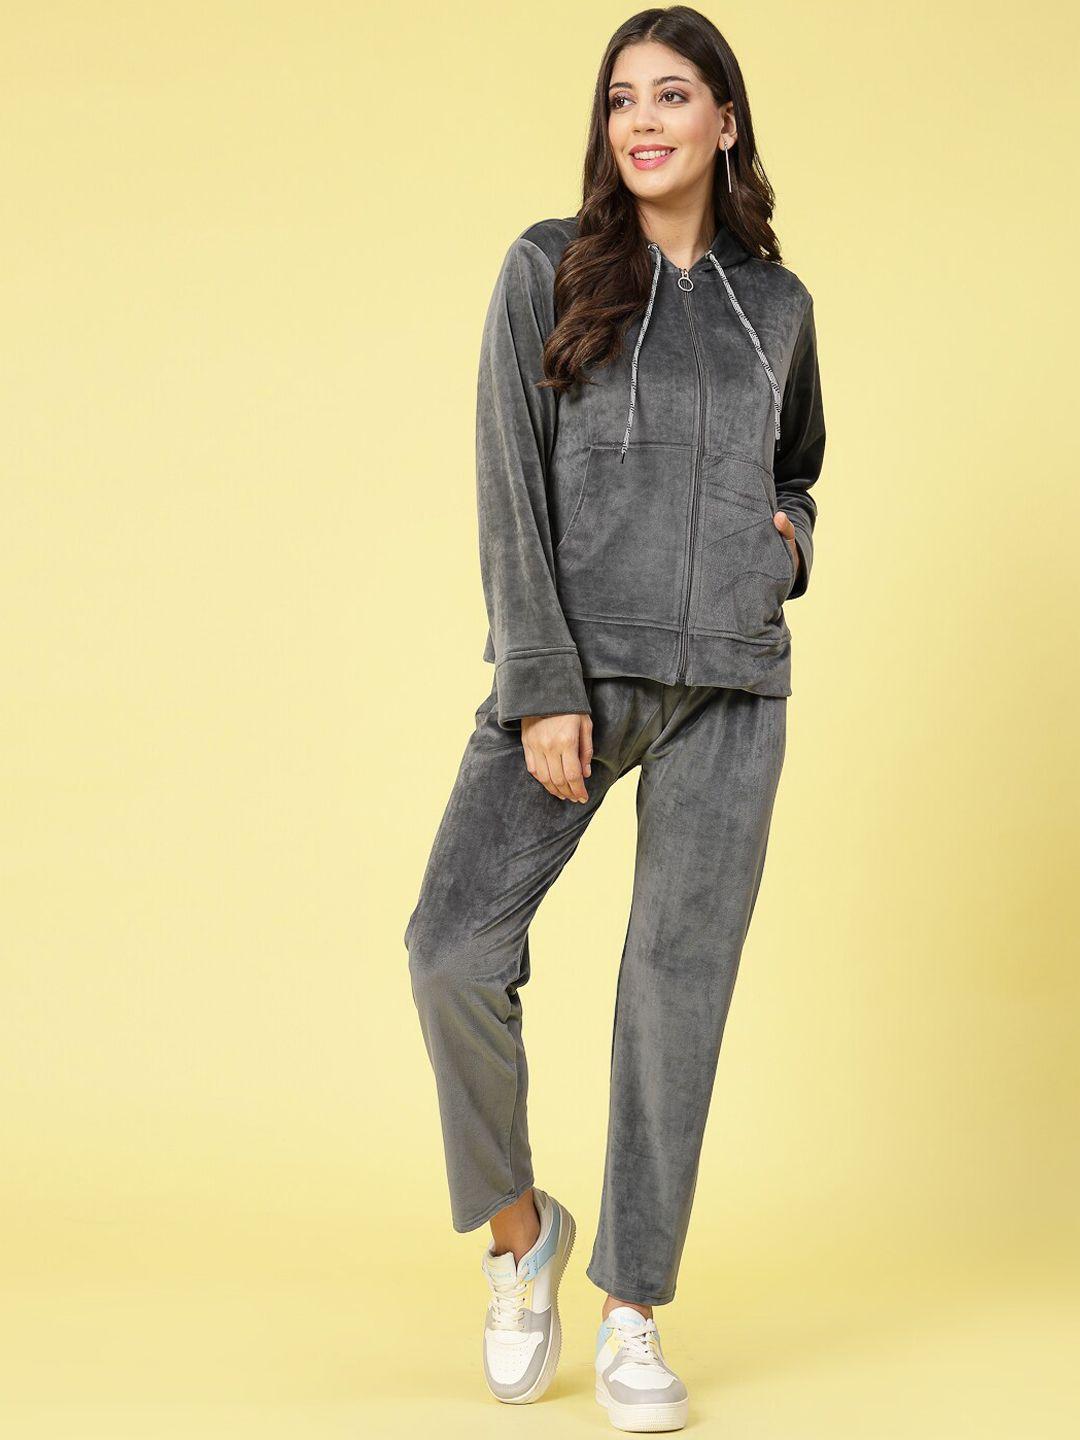 clora creation hooded sweatshirt with trouser